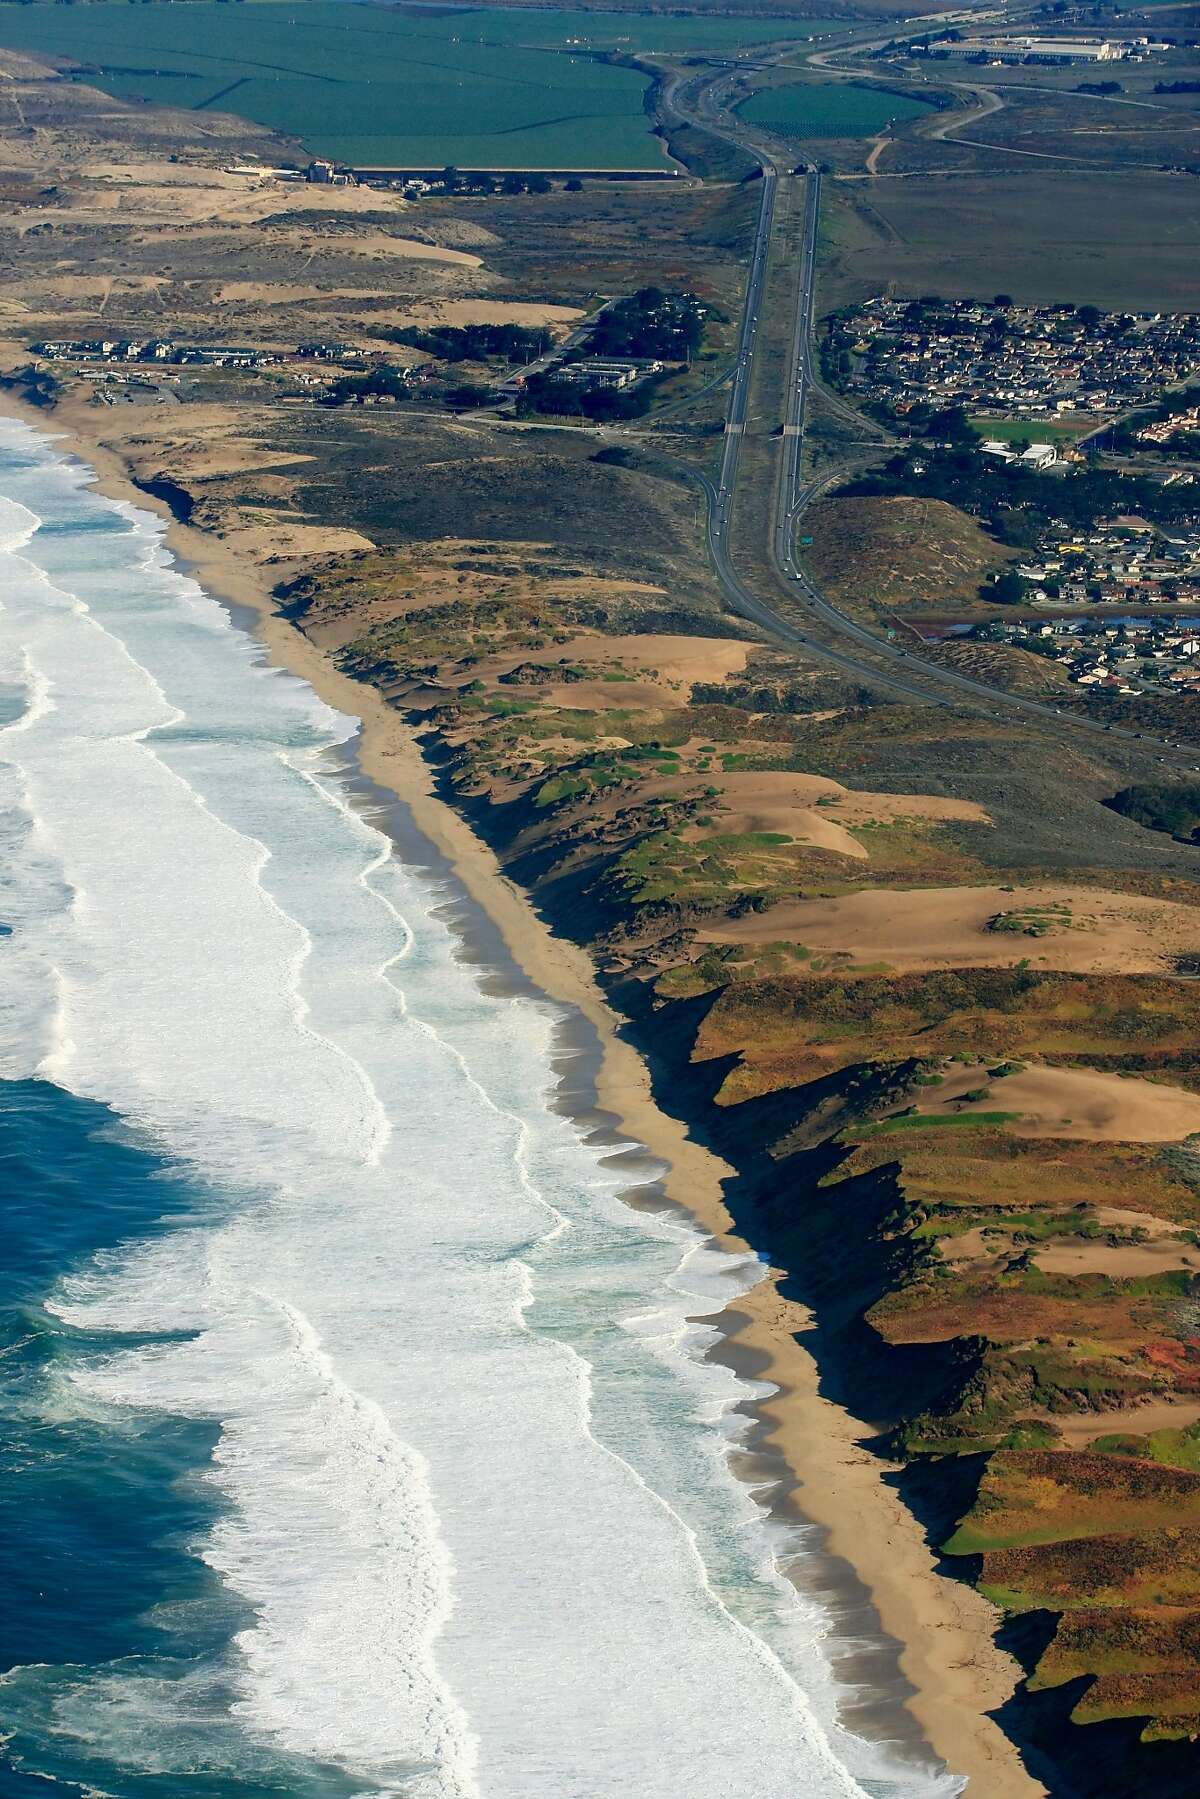 Aerial view of Marina, a city of 20,000 in Monterey County. The water utility that serves Monterey, Seaside, Pacific Grove, Pebble Beach and Carmel, wants to drill seven slant wells under Marina's city limits to take water for its customers. Marina is not one.